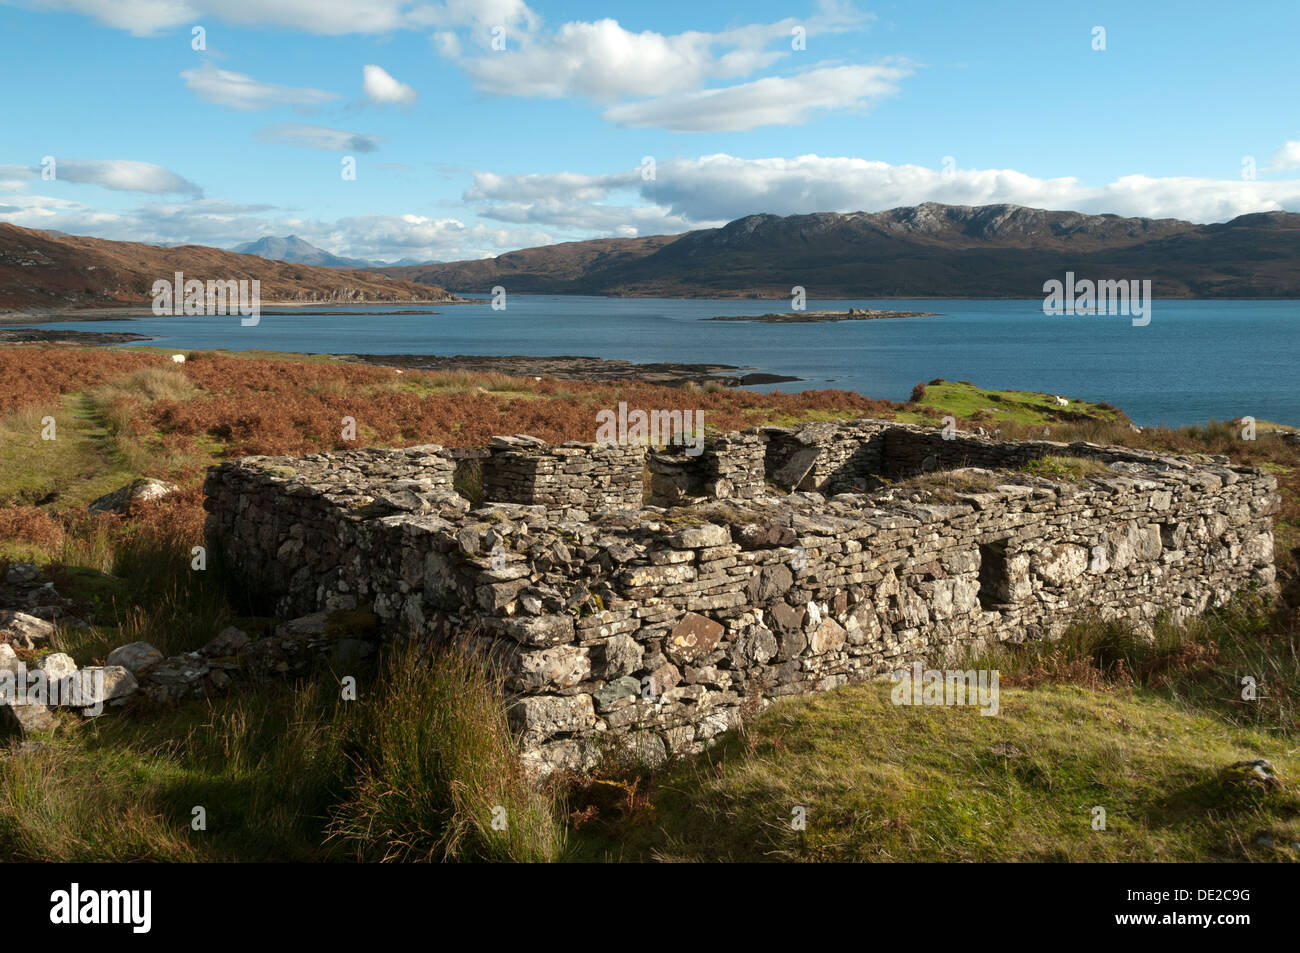 Ruined croft house in the clearance village of Boreraig, by Loch Eishort, Isle of Skye, Scotland, UK Stock Photo